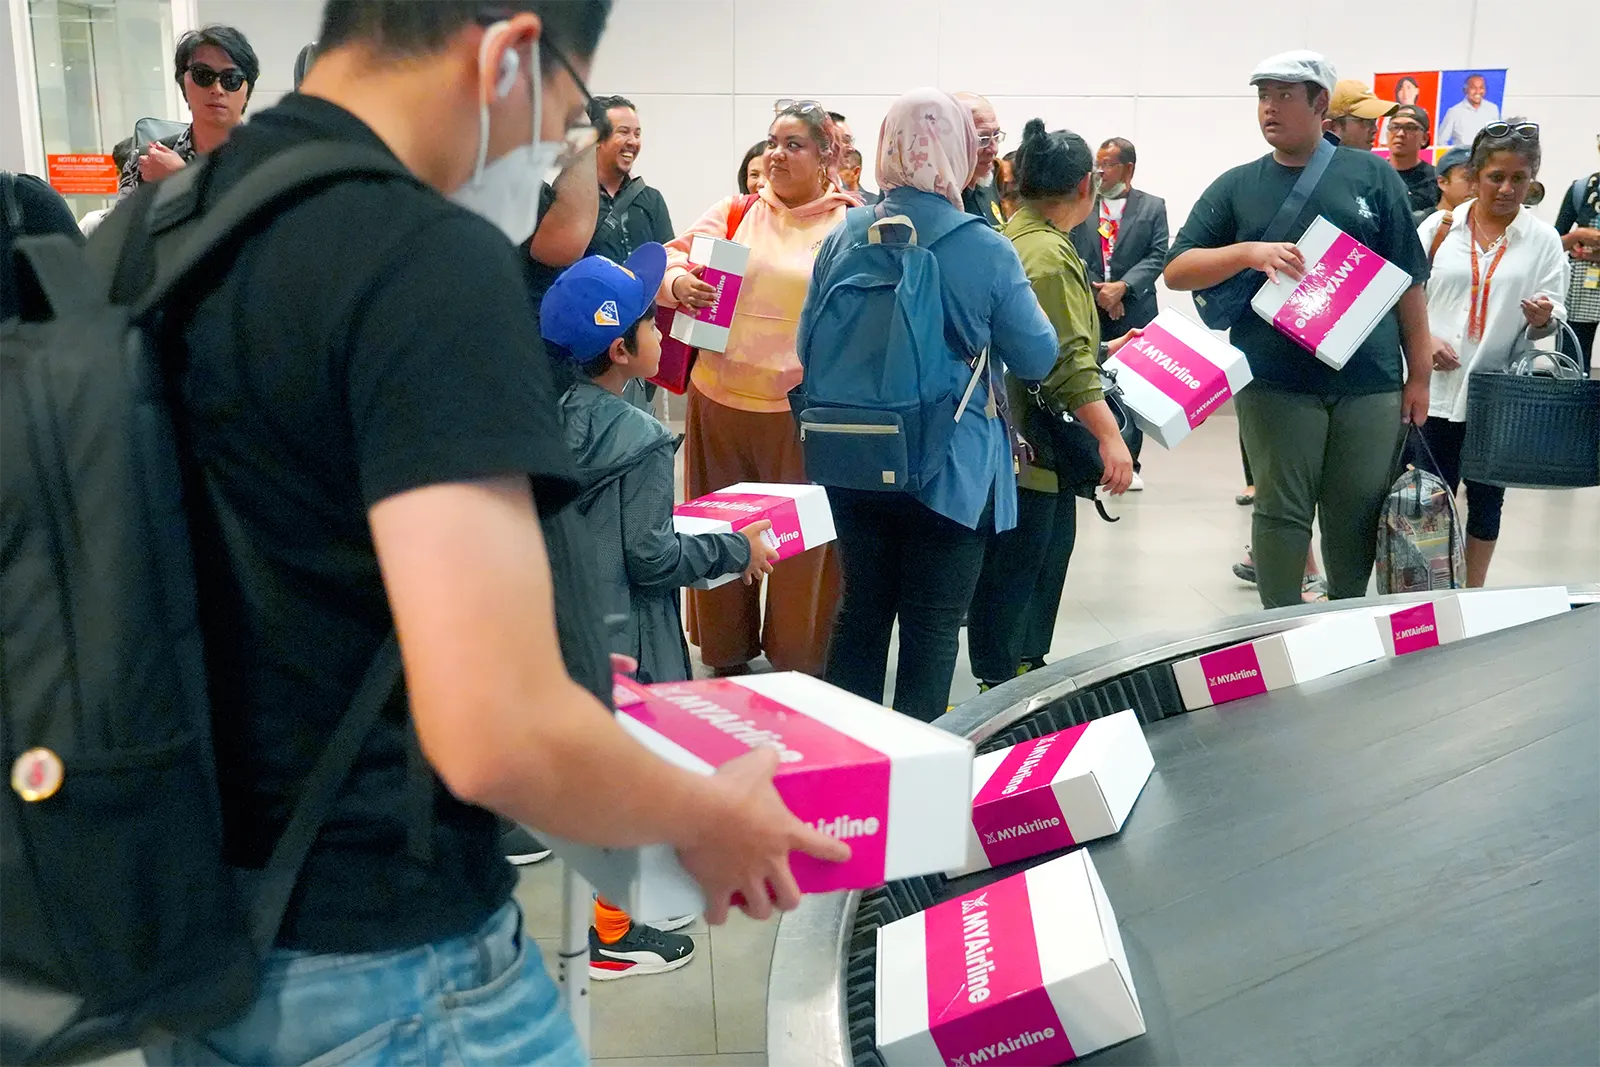 Passengers receiving their giftboxes that was placed on the luggage carousel